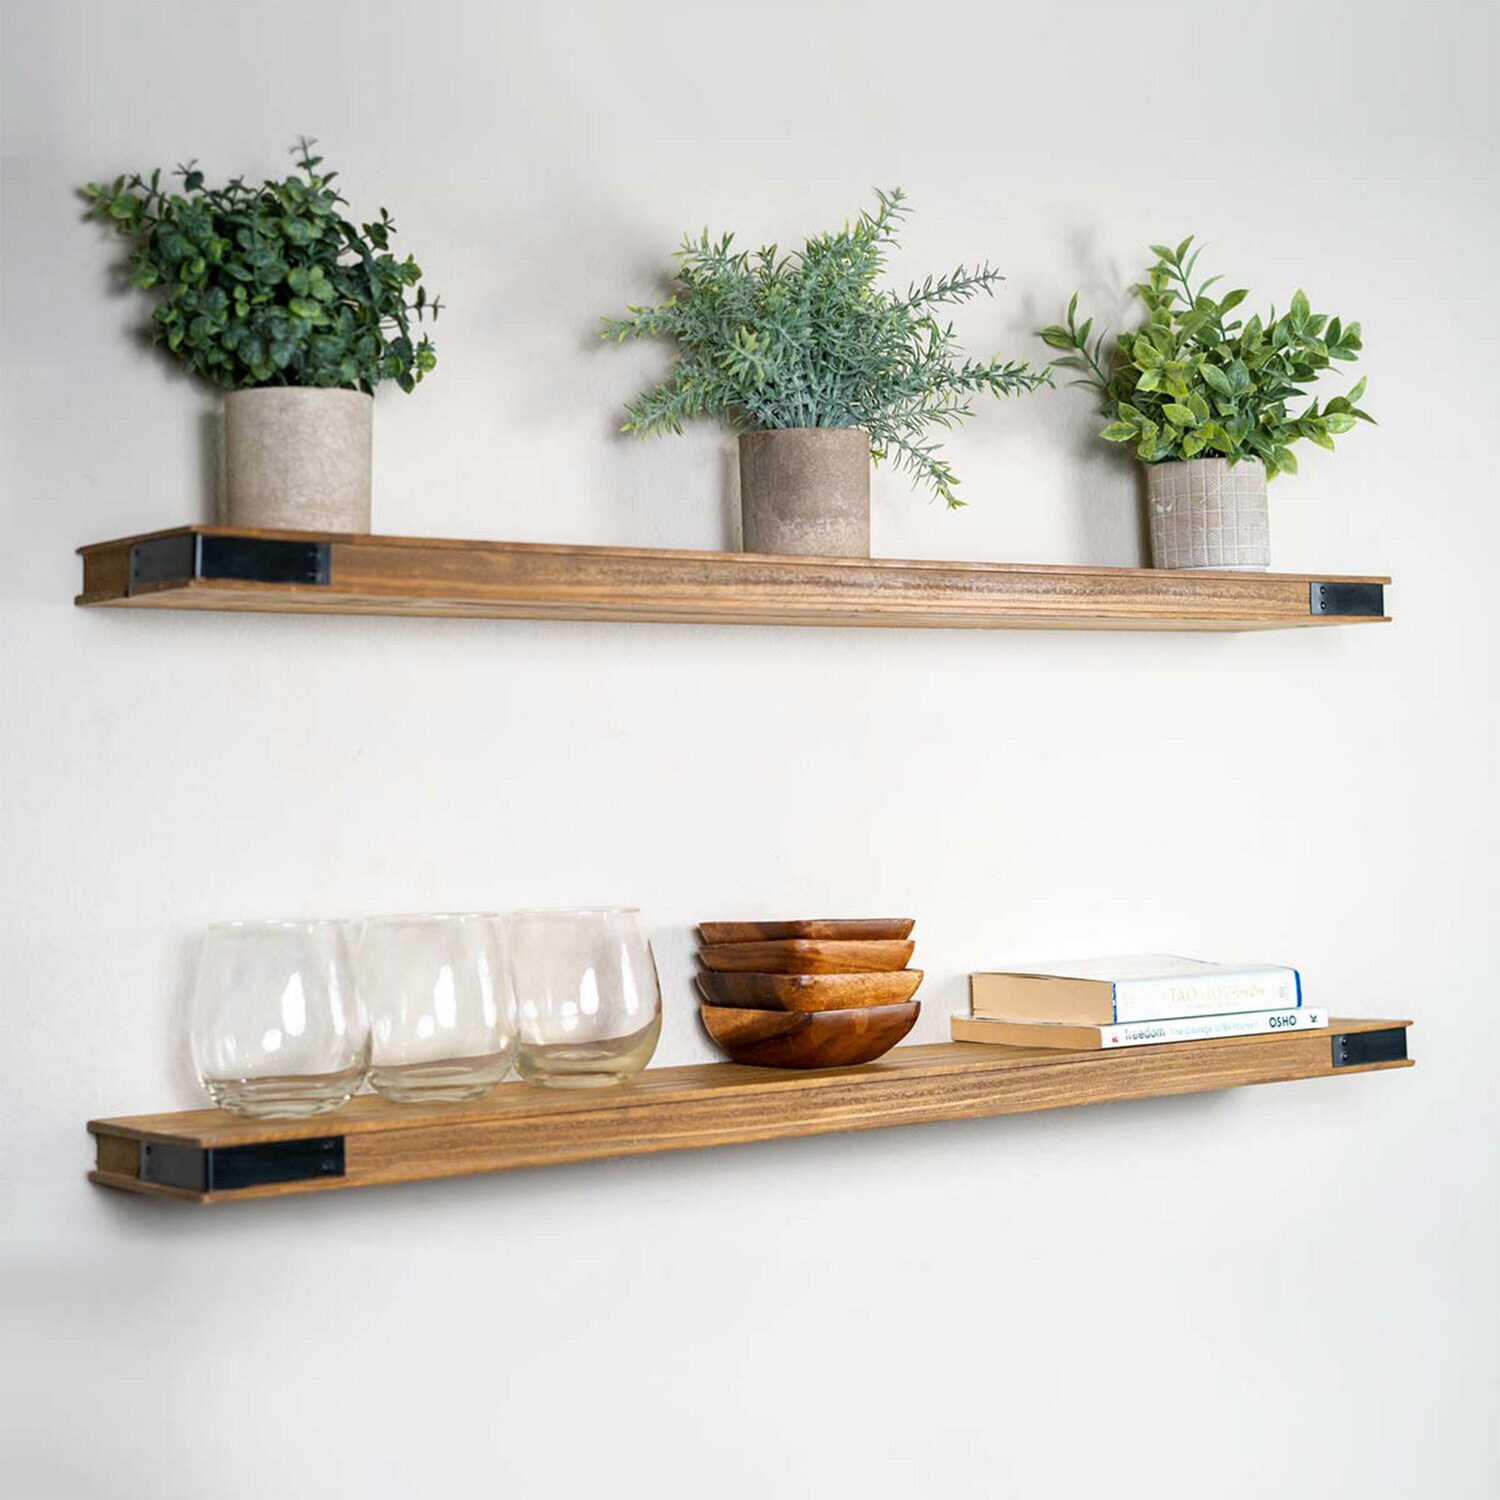 20.67 in. W x 4.3 in. D Variable Floating Shelves Wood Set of 4, Rustic  Shelves for Wall, Decorative Wall Shelf PU6ZGM - The Home Depot